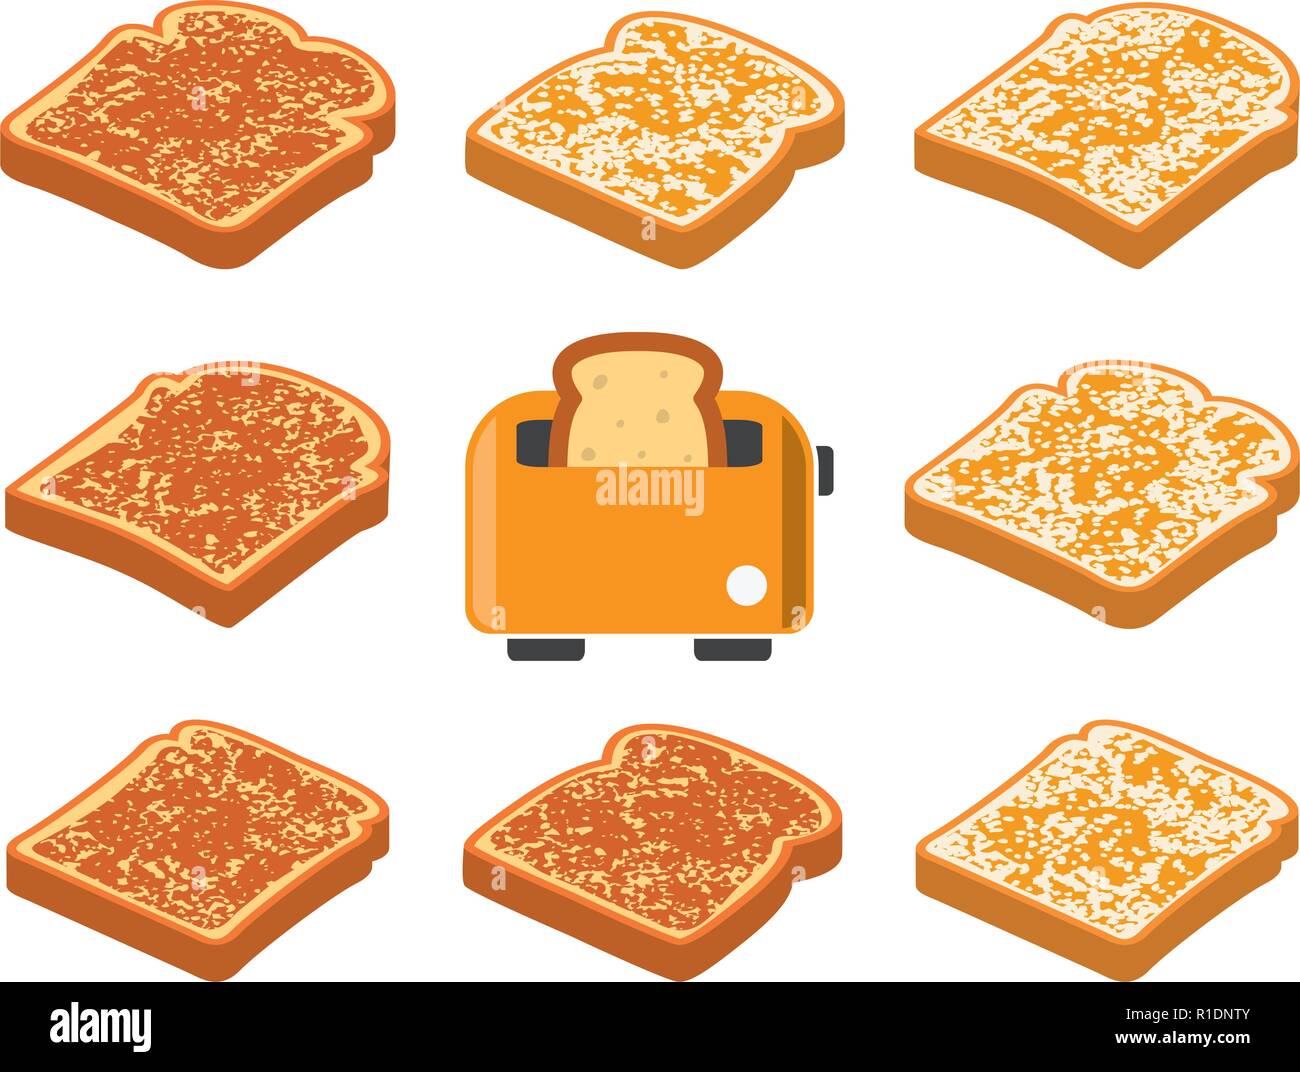 vector toasted bread slices and toaster isolated on white background. crispy breakfast toasts of white bread, delicious food symbols. icon of kitchen  Stock Vector